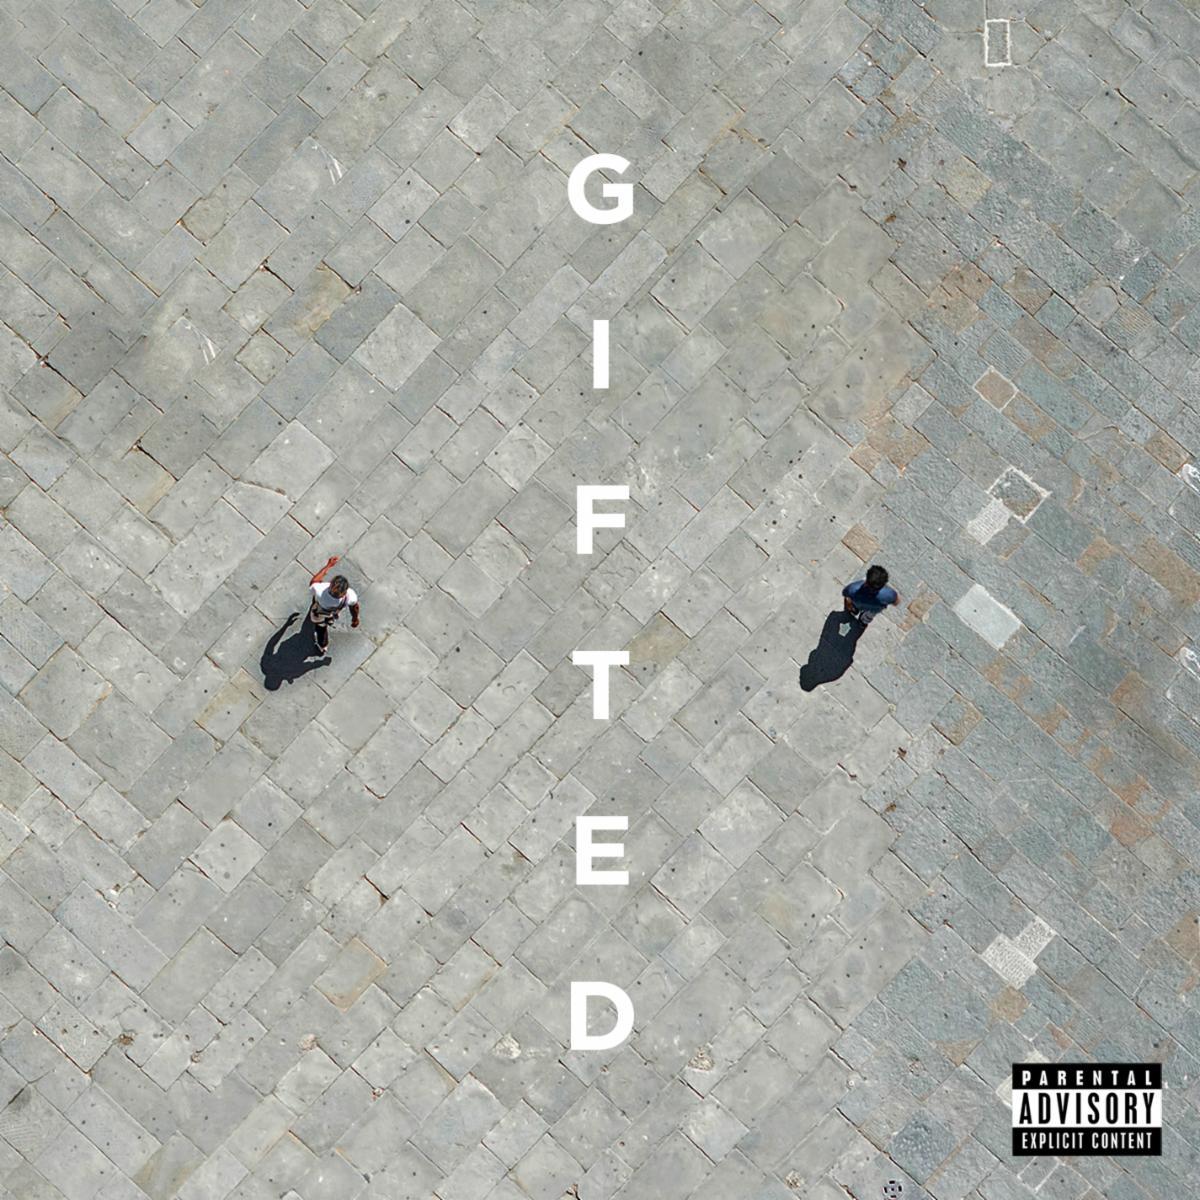 Cordae & Roddy Ricch Join Forces For “Gifted”